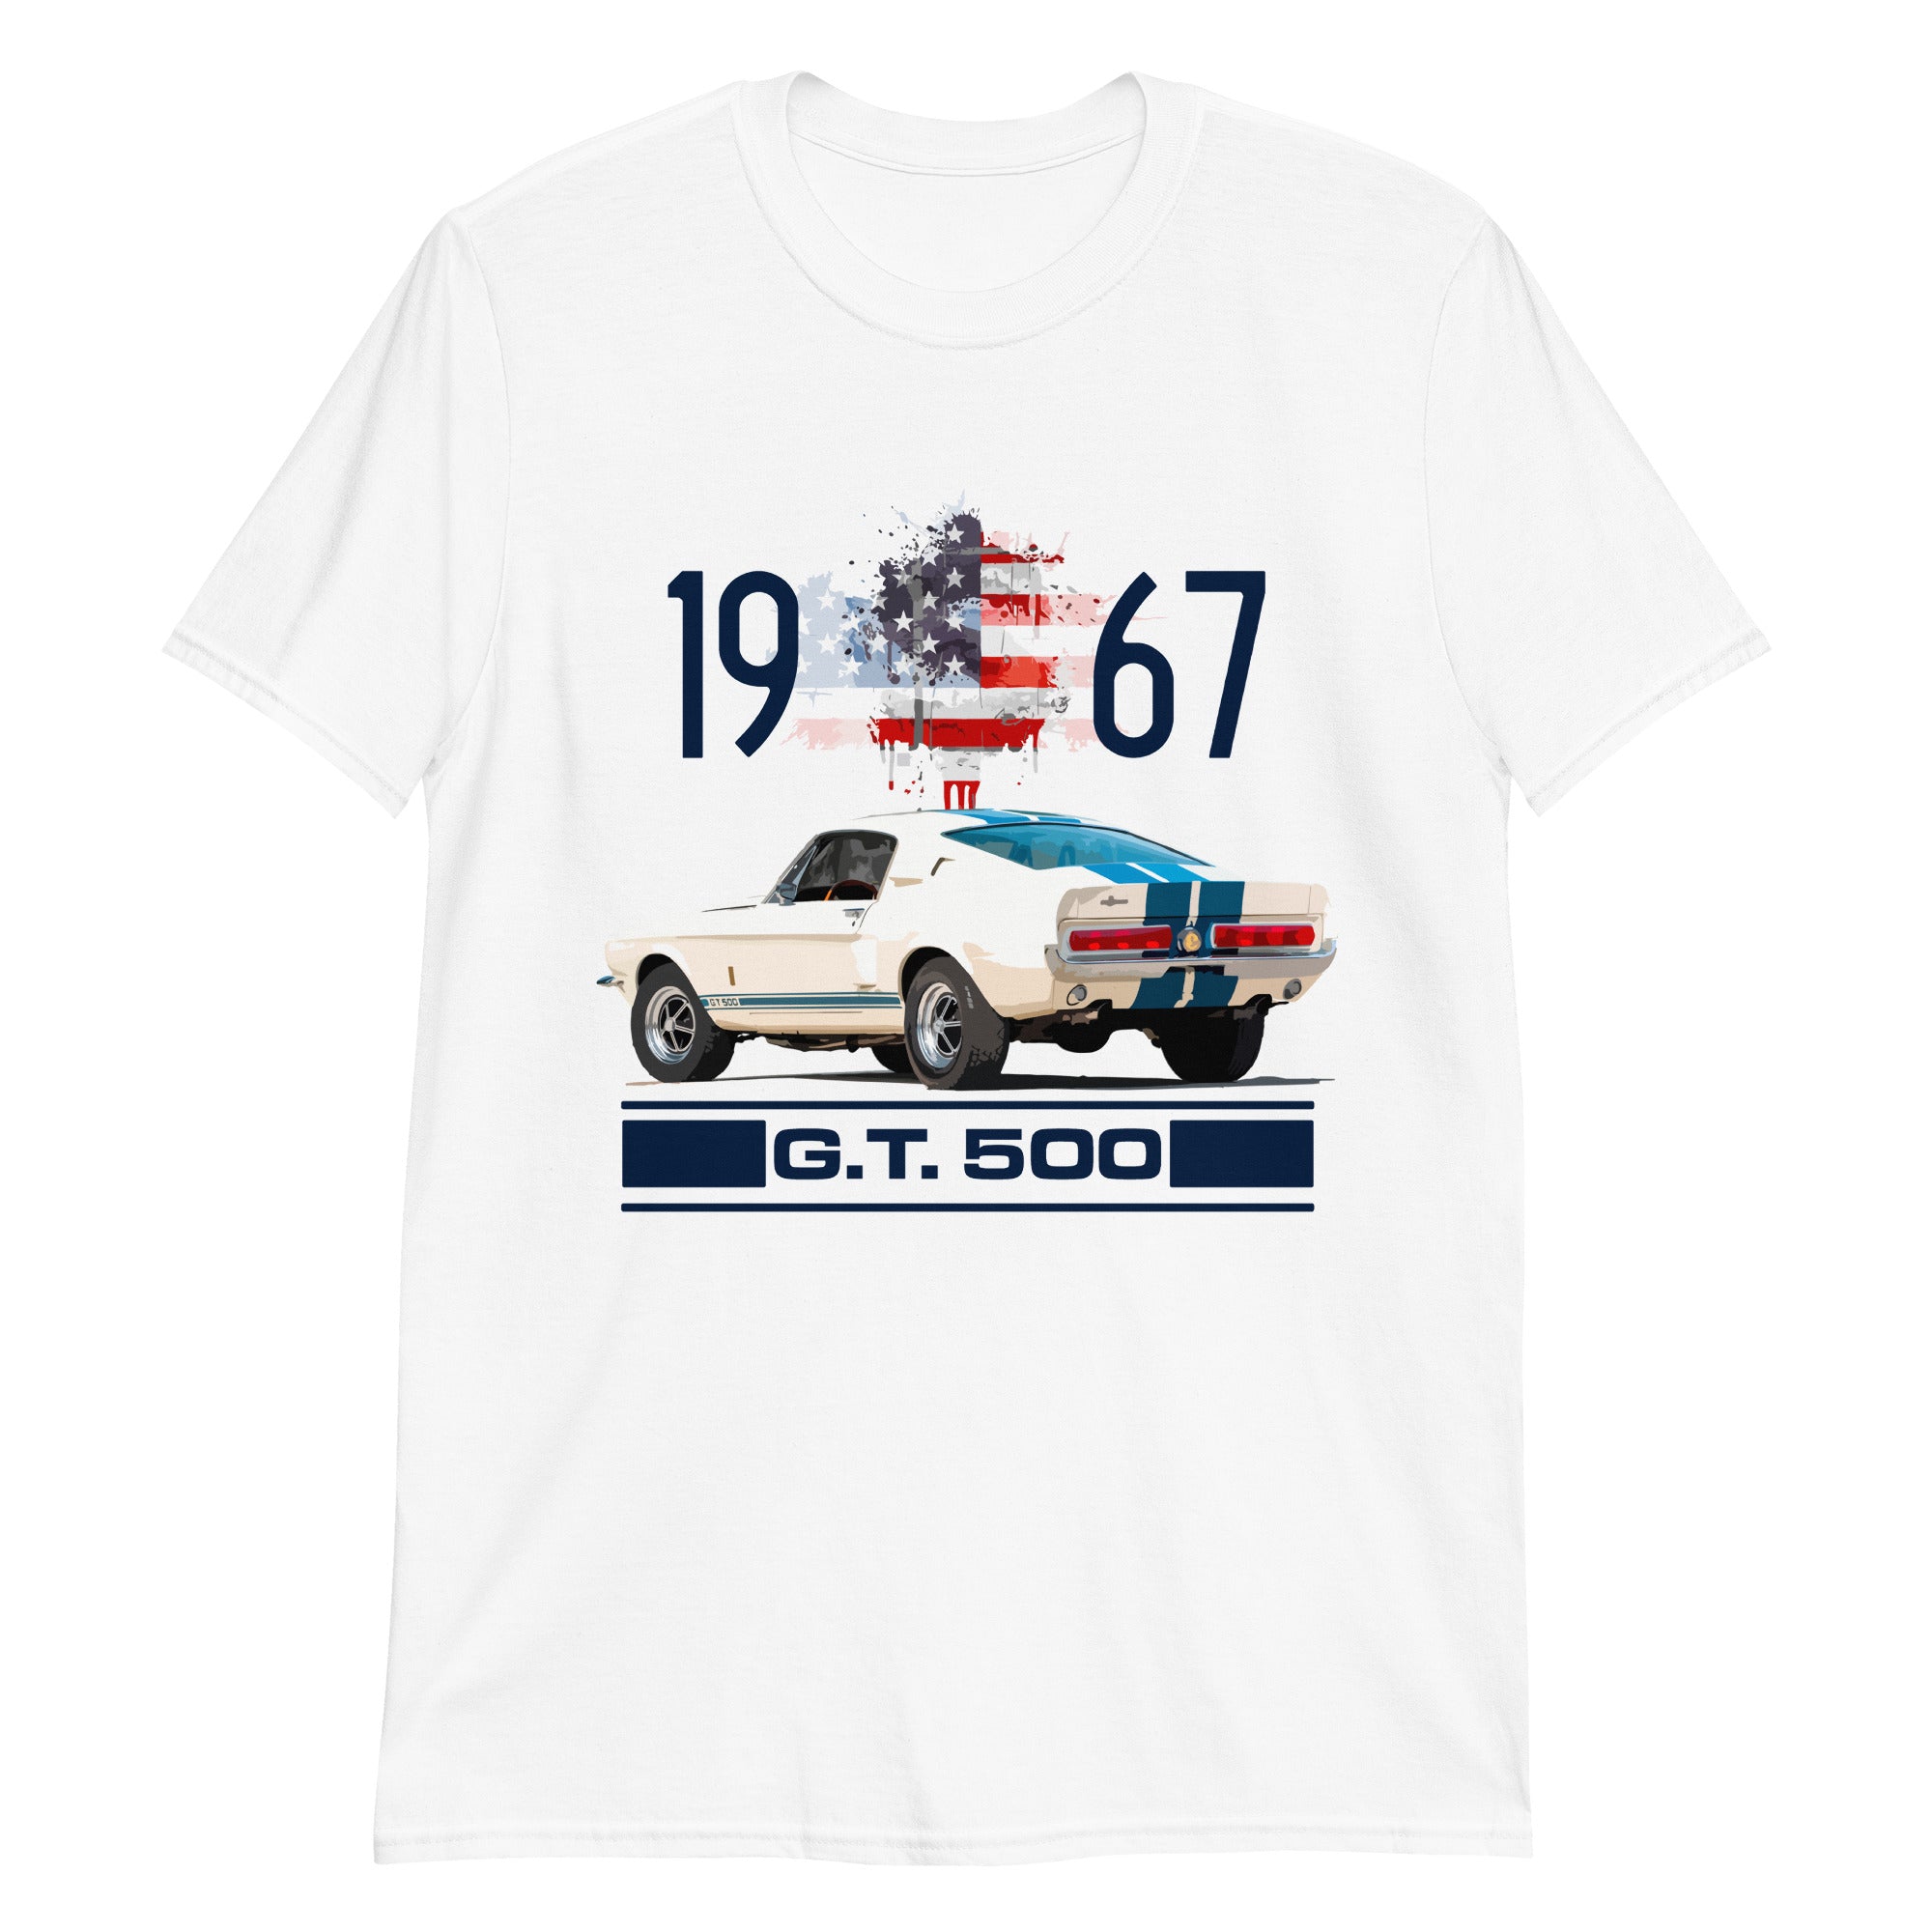 1967 Shelby GT500 Mustang Fastback Collector Car Gift Short-Sleeve T-Shirt